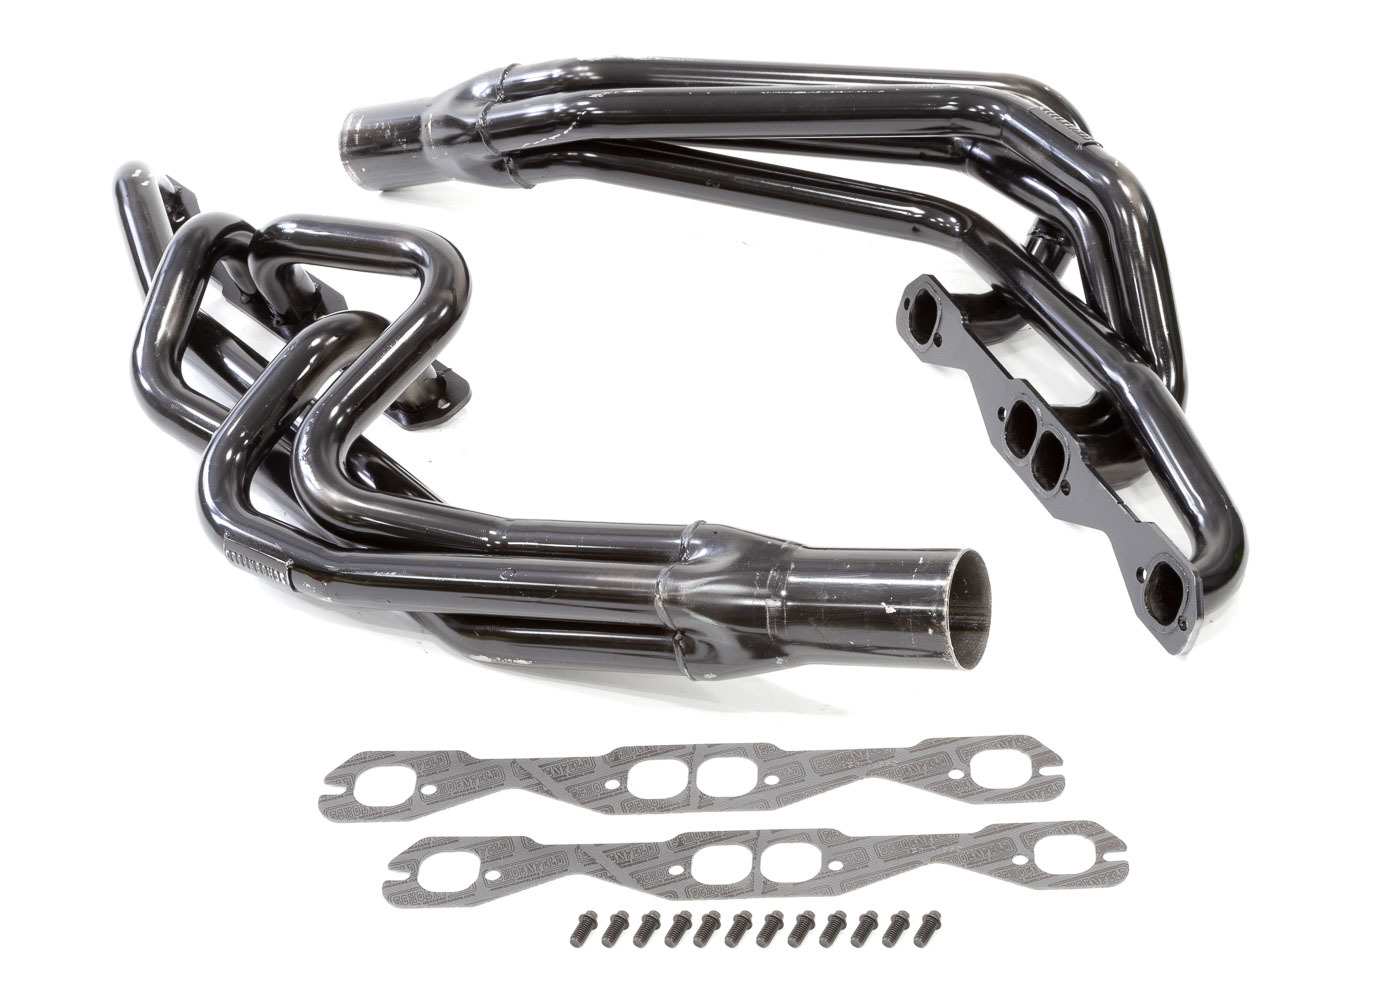 Schoenfeld Headers 135CM2 - Headers, Conventional Crossover, 1-5/8 in Primary, 3 in Collector, Steel, Black Paint, 602 Crate, Small Block Chevy, Kit